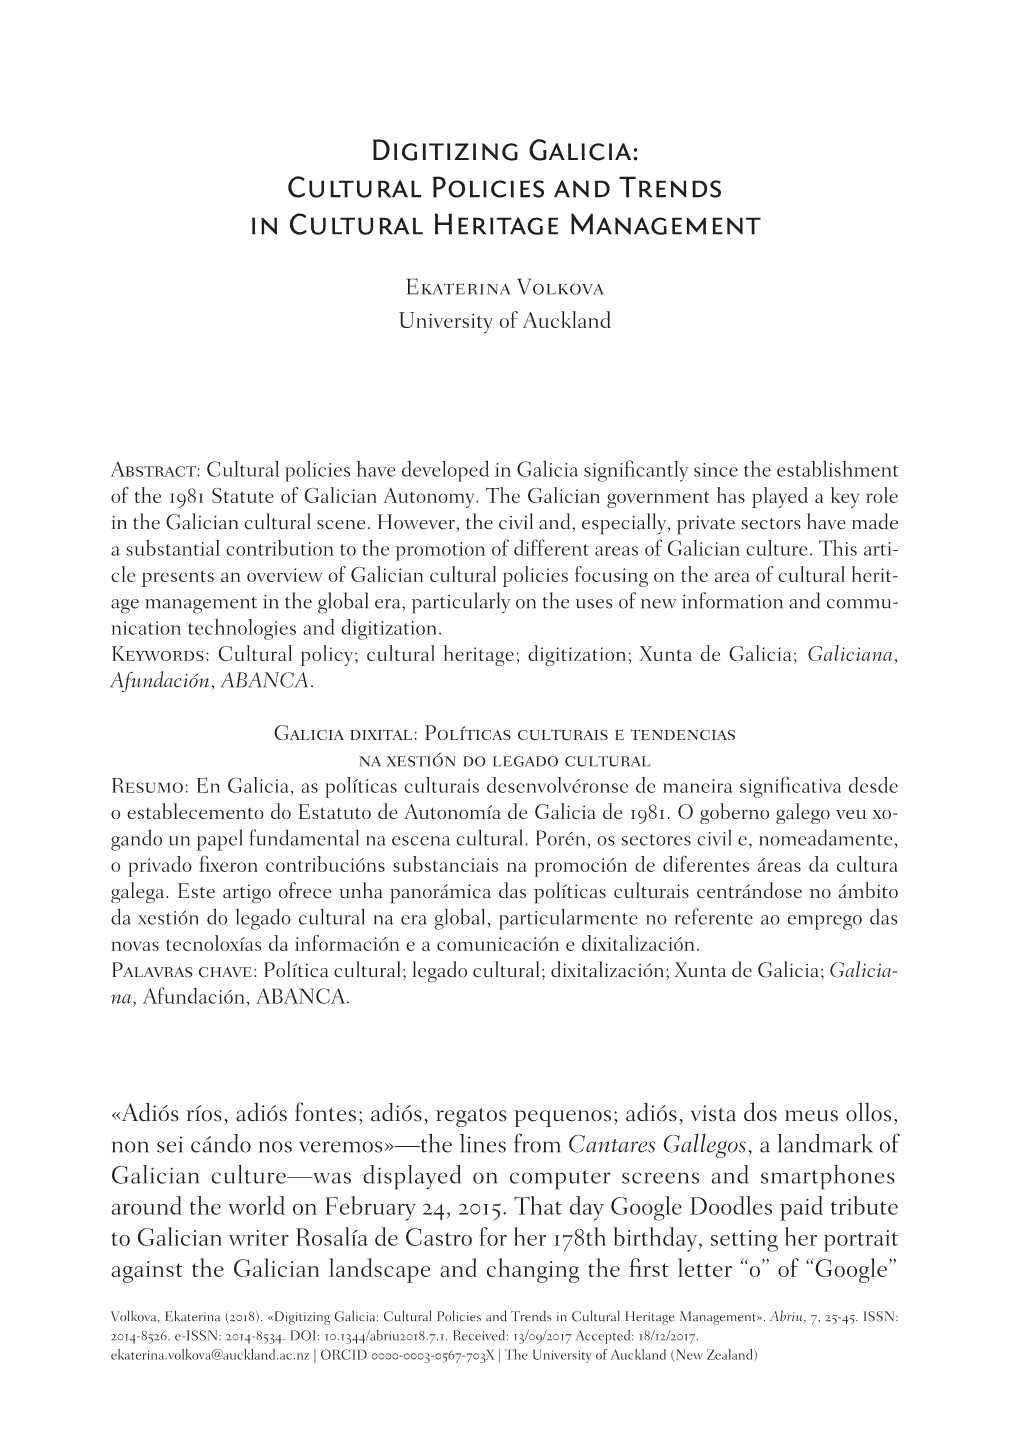 Digitizing Galicia: Cultural Policies and Trends in Cultural Heritage Management